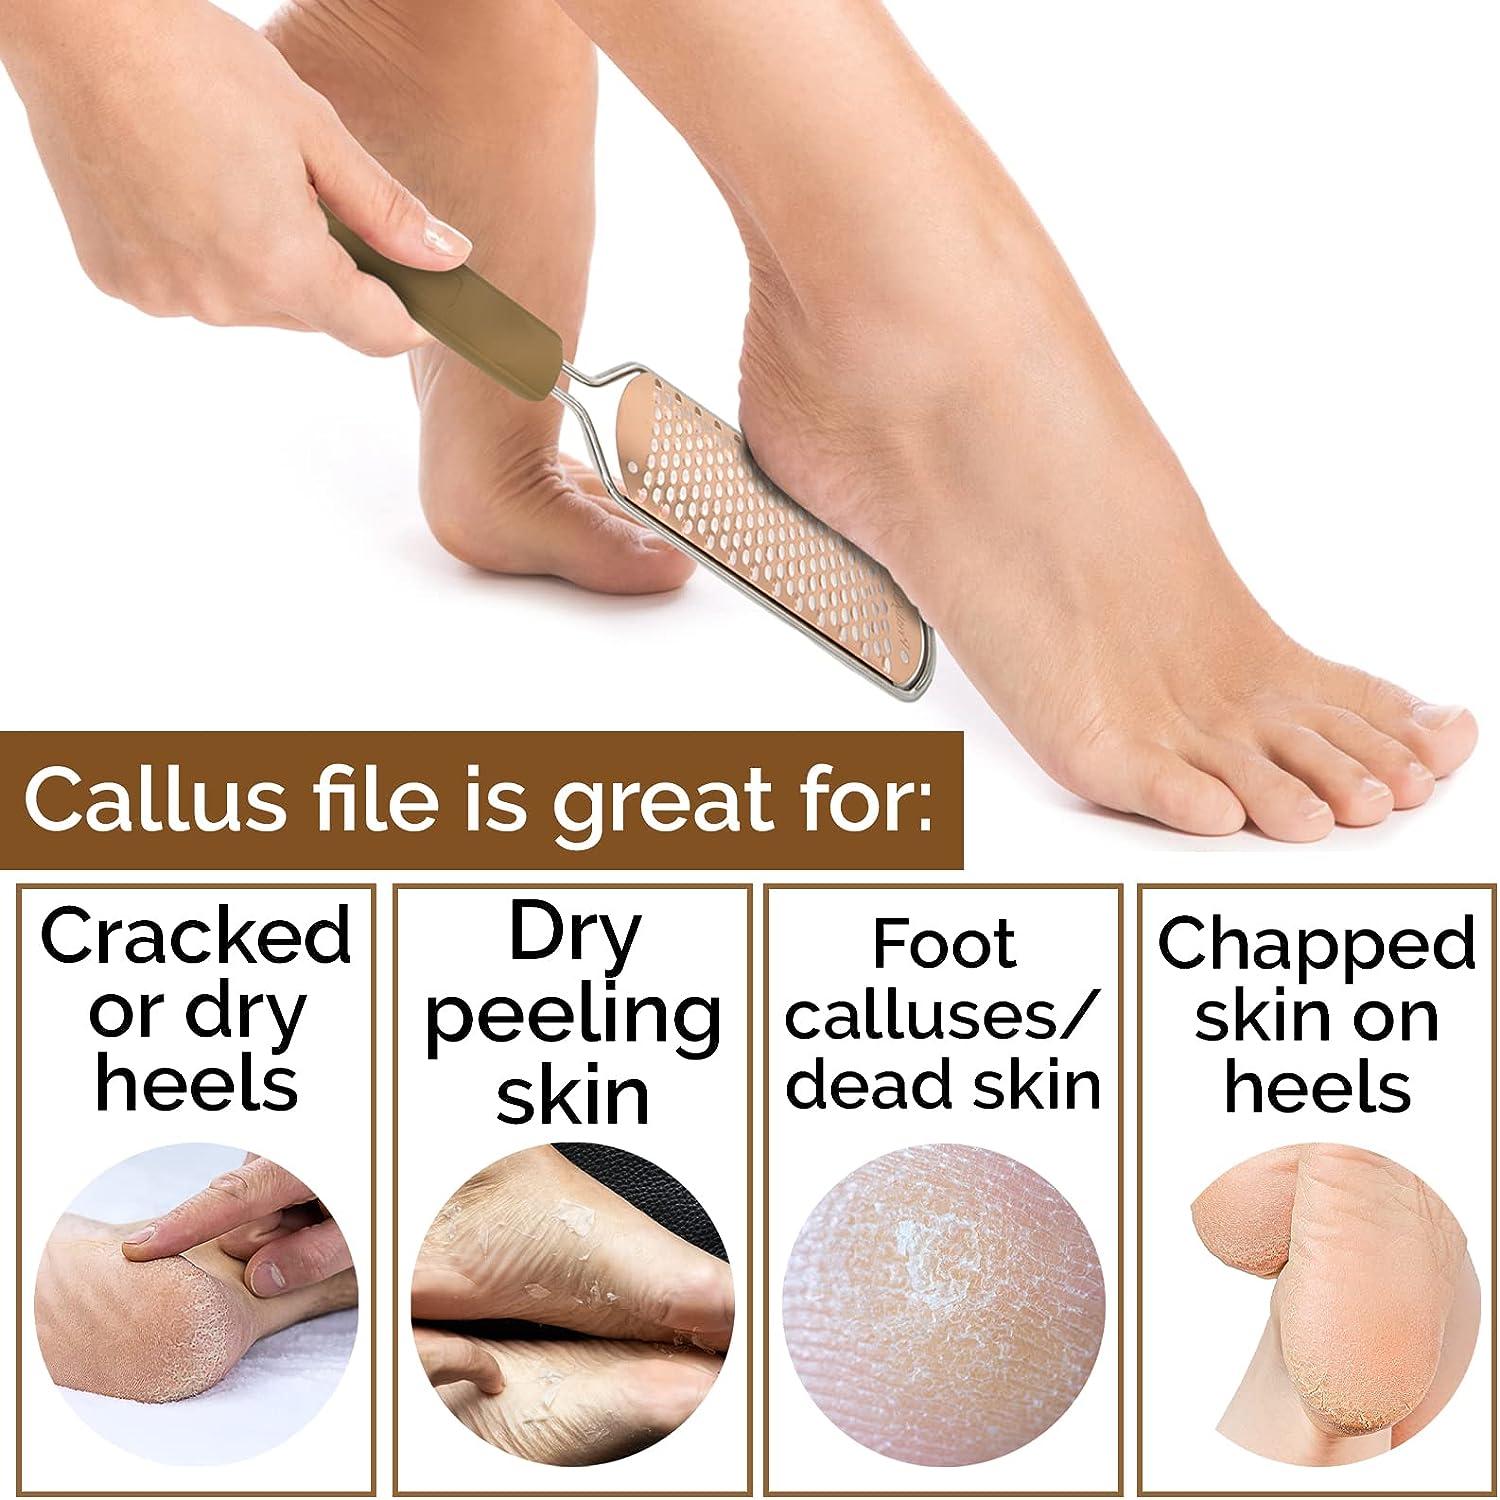 Professional Pedicure Foot File, Foot File Rasp, Callus Remover, Foot  Scrubber - Perfect Foot Care For Cracked Heels - Corn Remover/file -  Pedicure To